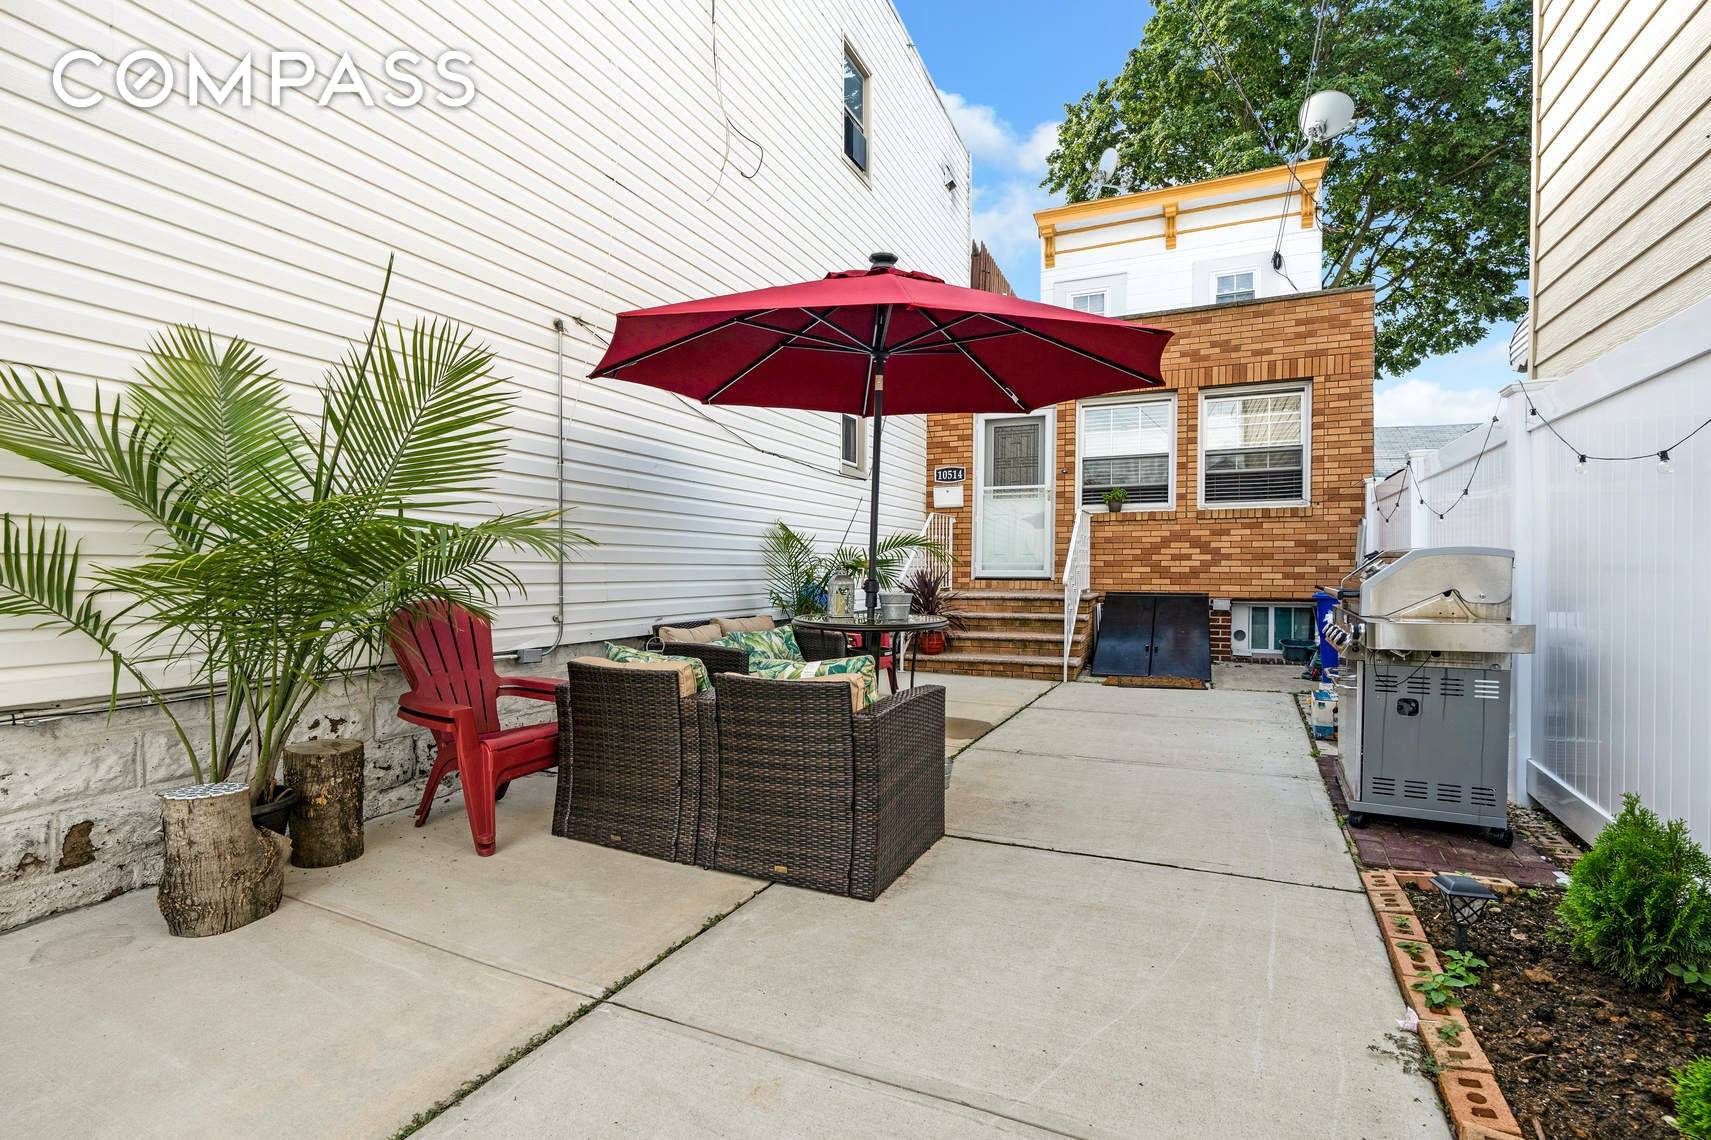 This bright and quaint two bedroom, one and a half bathroom house is a peaceful haven in Richmond Hill, Queens.